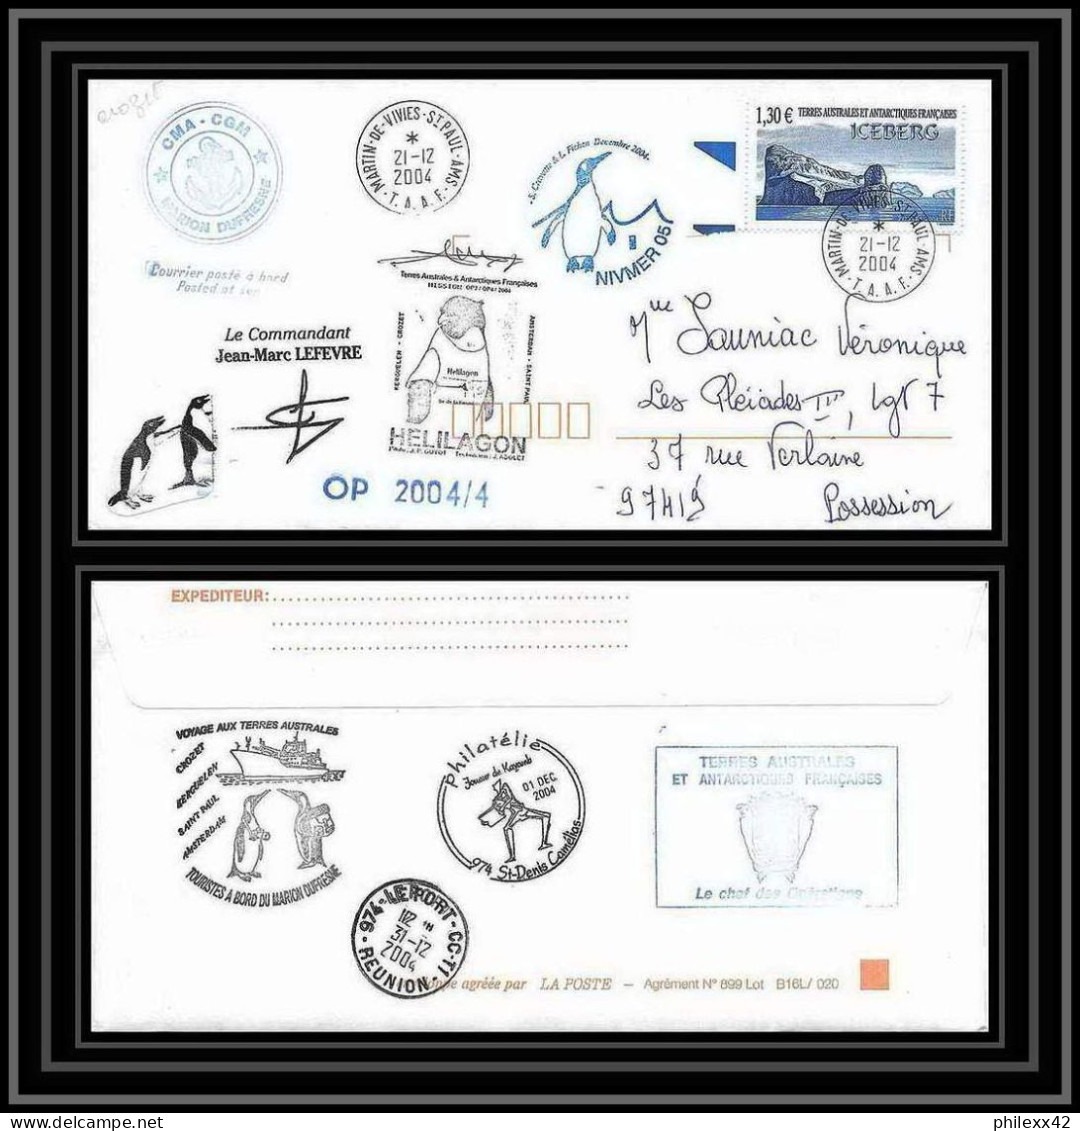 2485 ANTARCTIC Terres Australes TAAF Lettre Cover Dufresne 2 Signé Signed OP 2004/4 N°387 21/12/2004 Helilagon - Helikopters